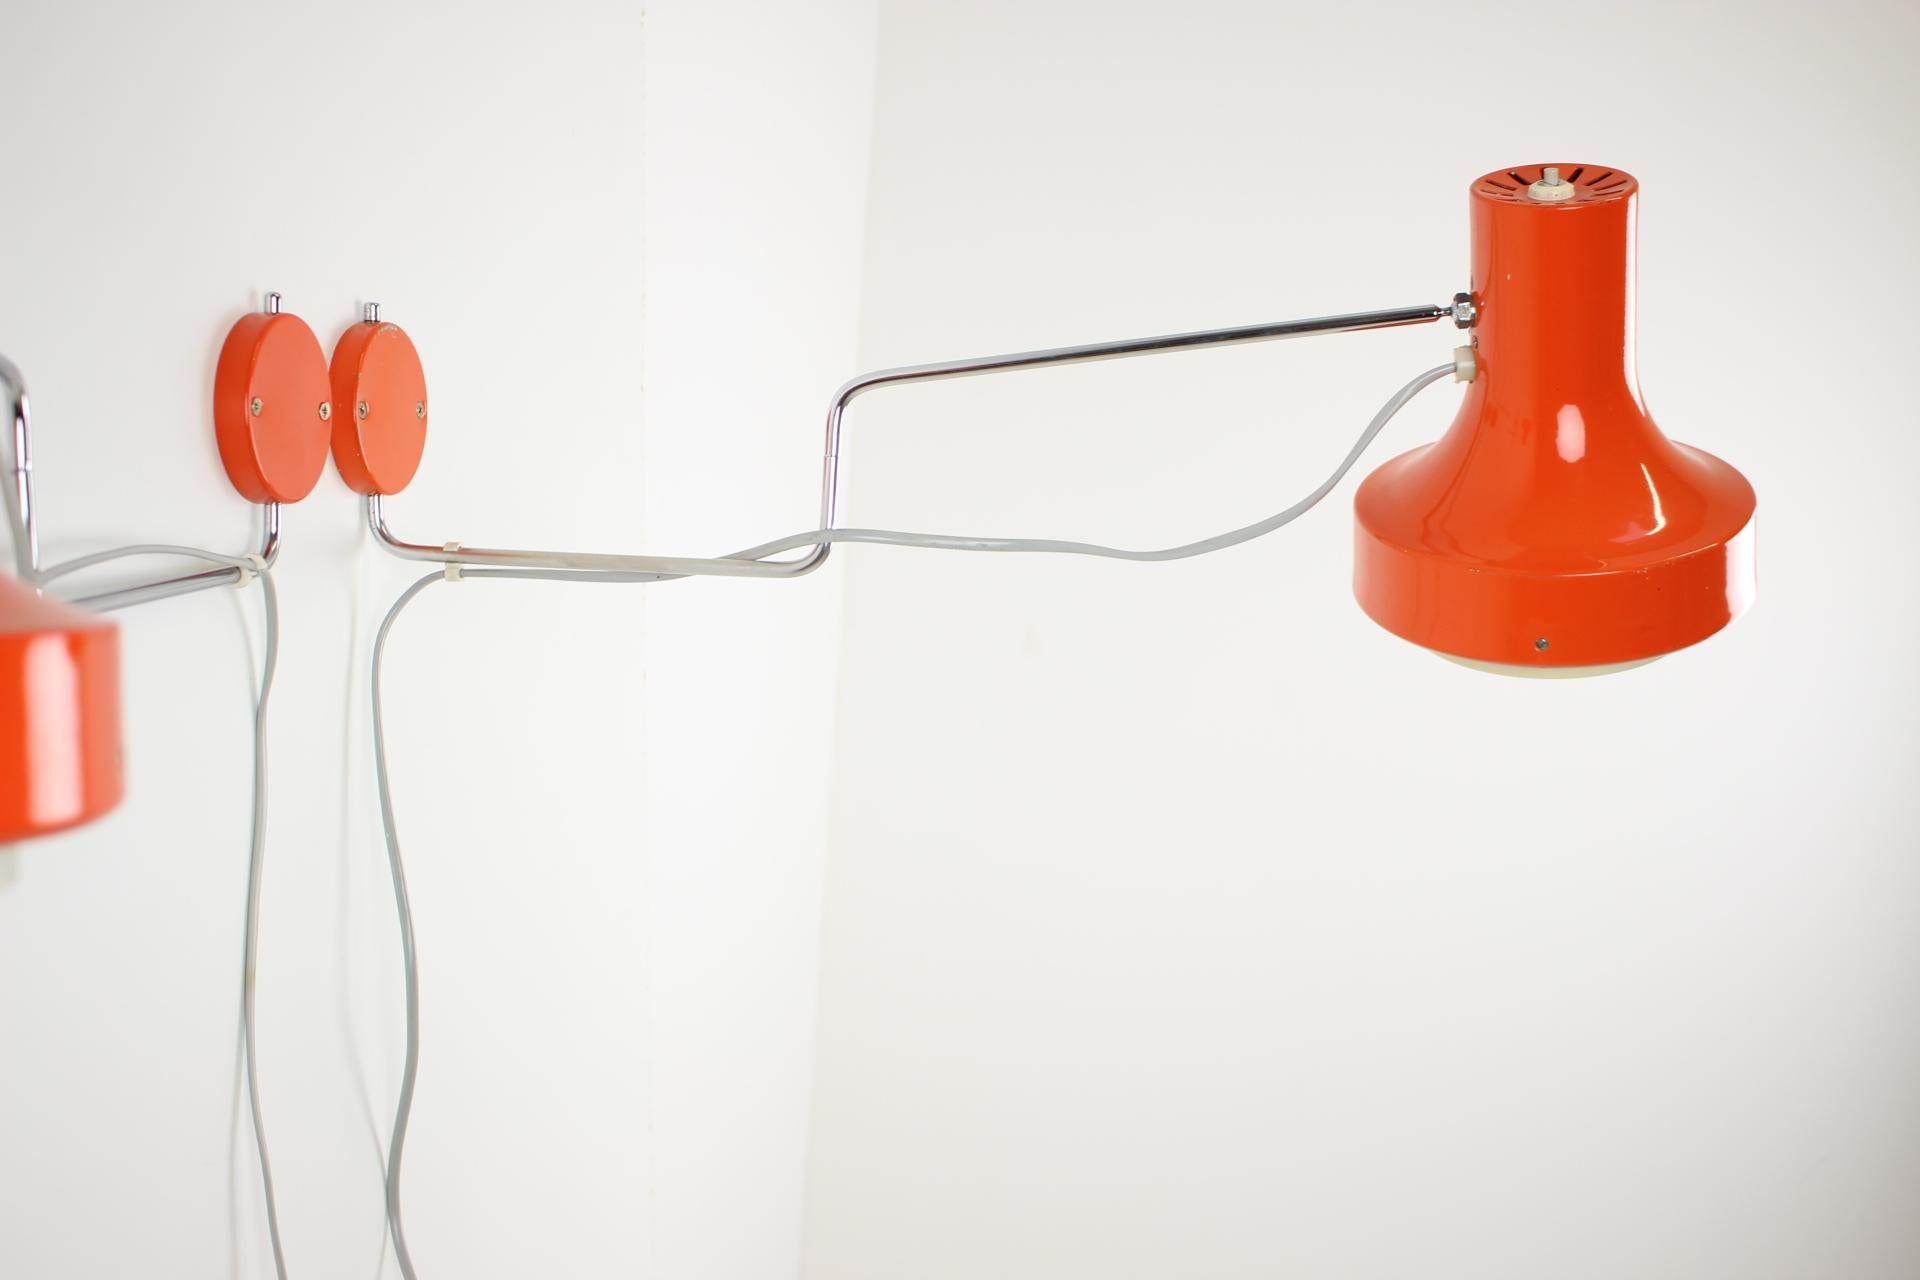 Czech Mid-Century Wall Lamps Designed by Josef Hurka for Napako, 1970's For Sale